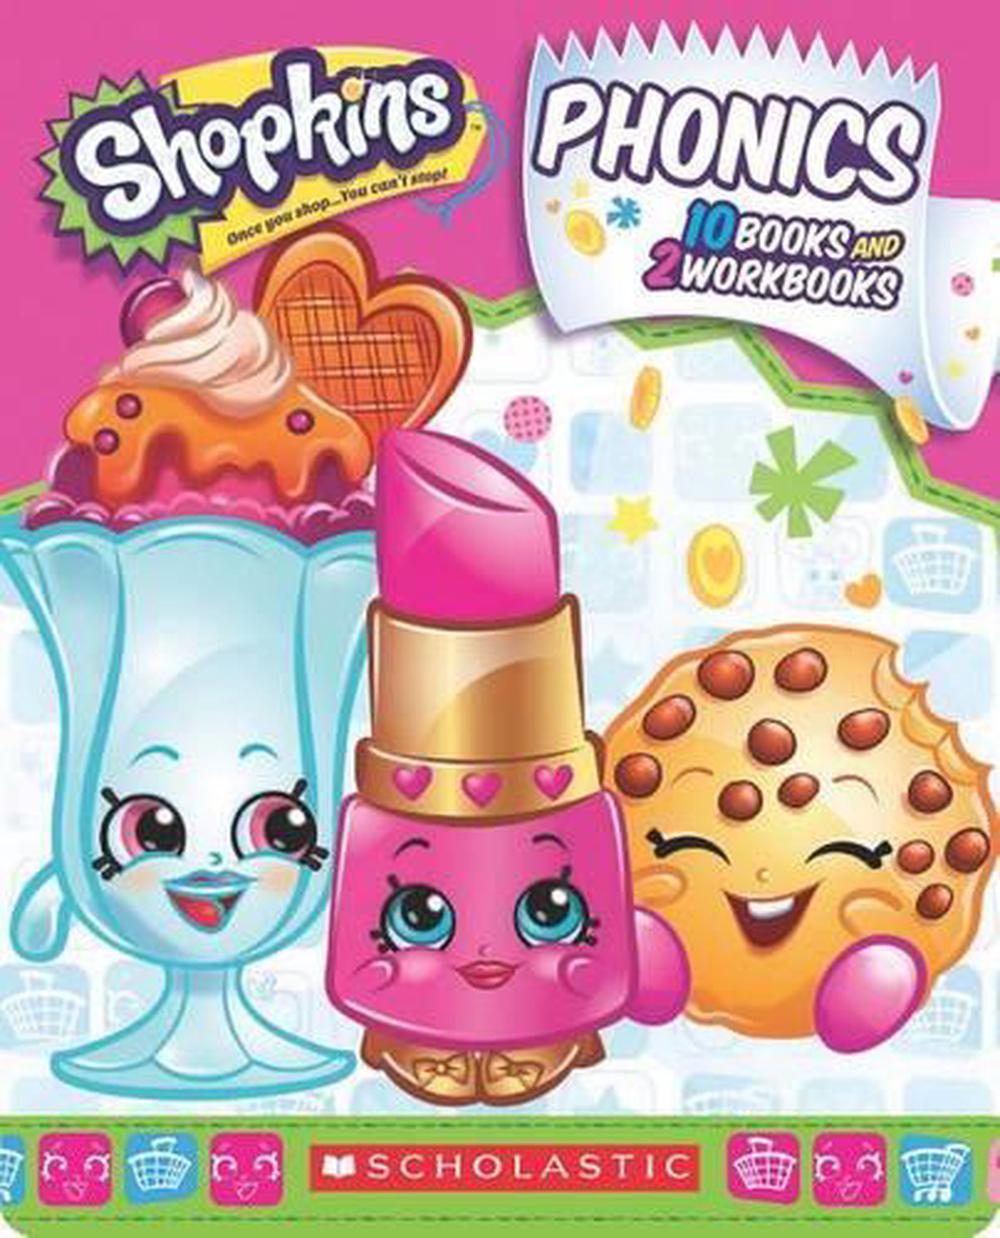 Shopkins Phonics Boxed Set by Inc. Scholastic (English) Hardcover Book